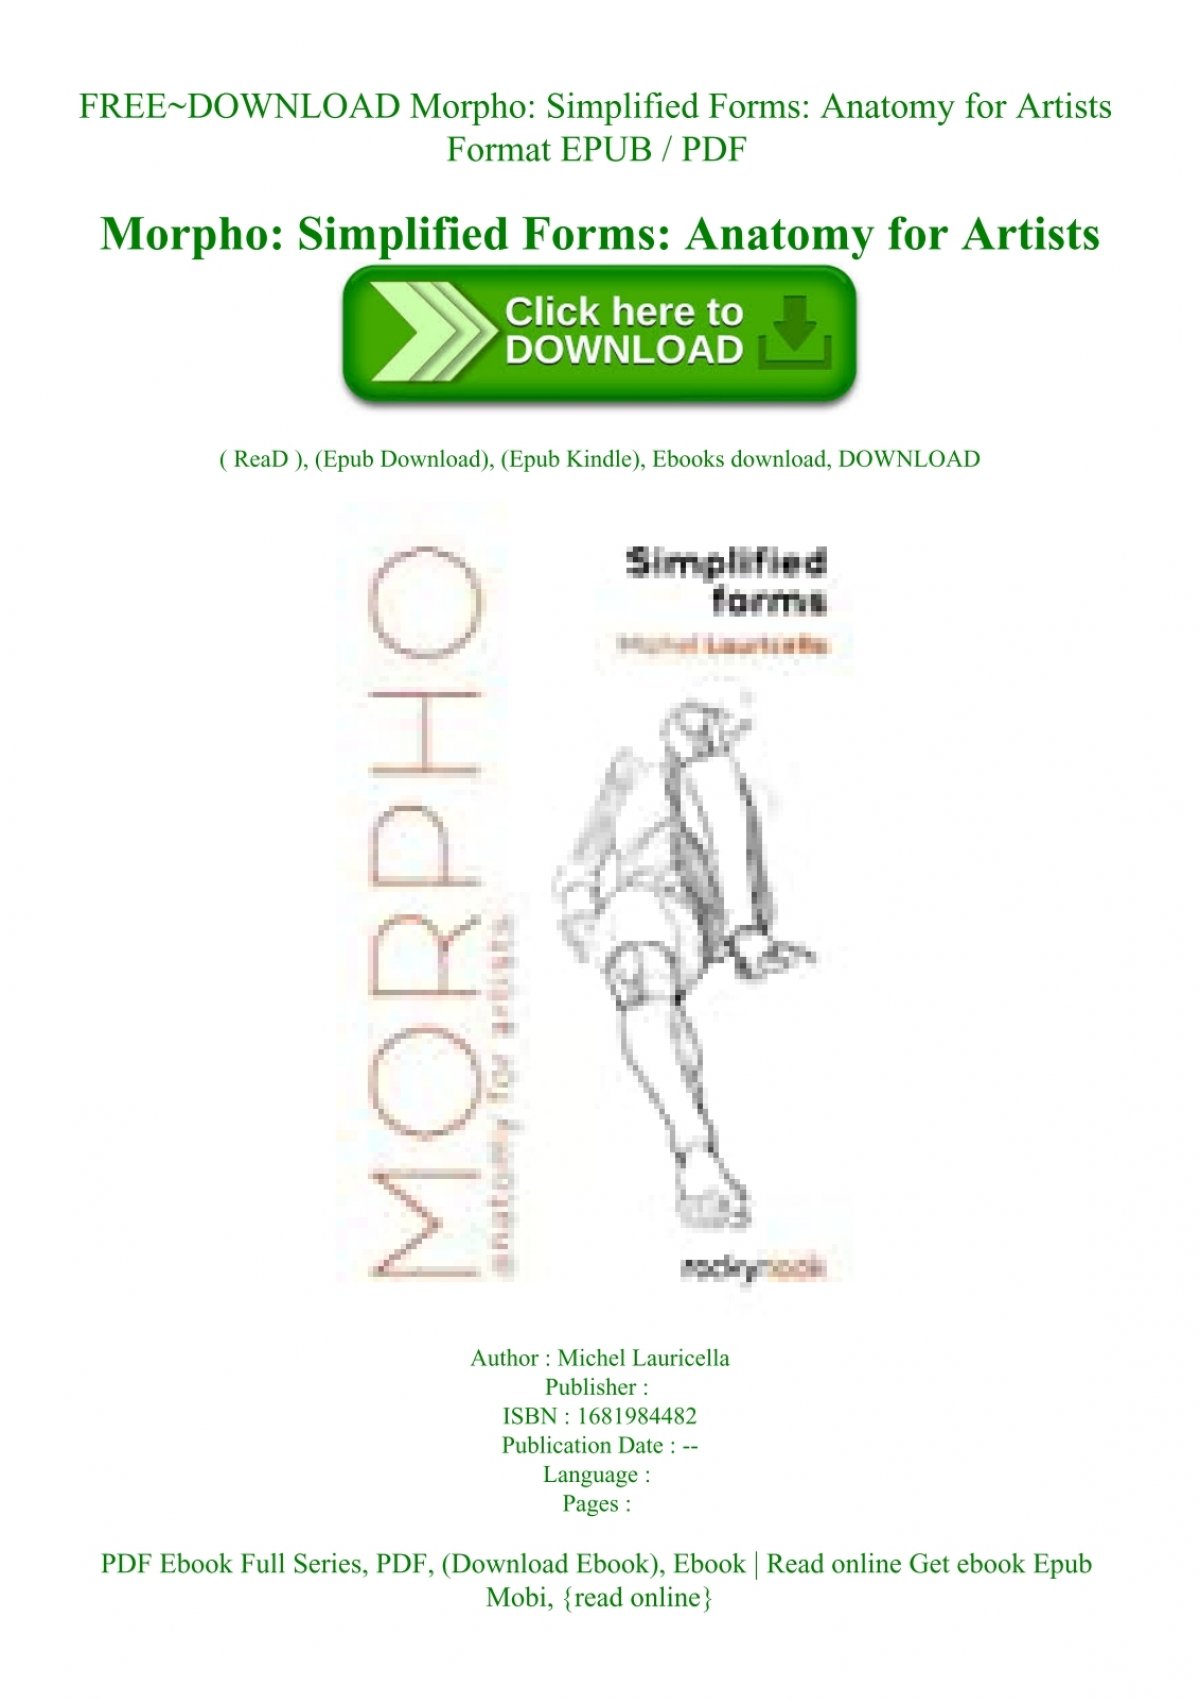 free-download-morpho-simplified-forms-anatomy-for-artists-format-epub-pdf